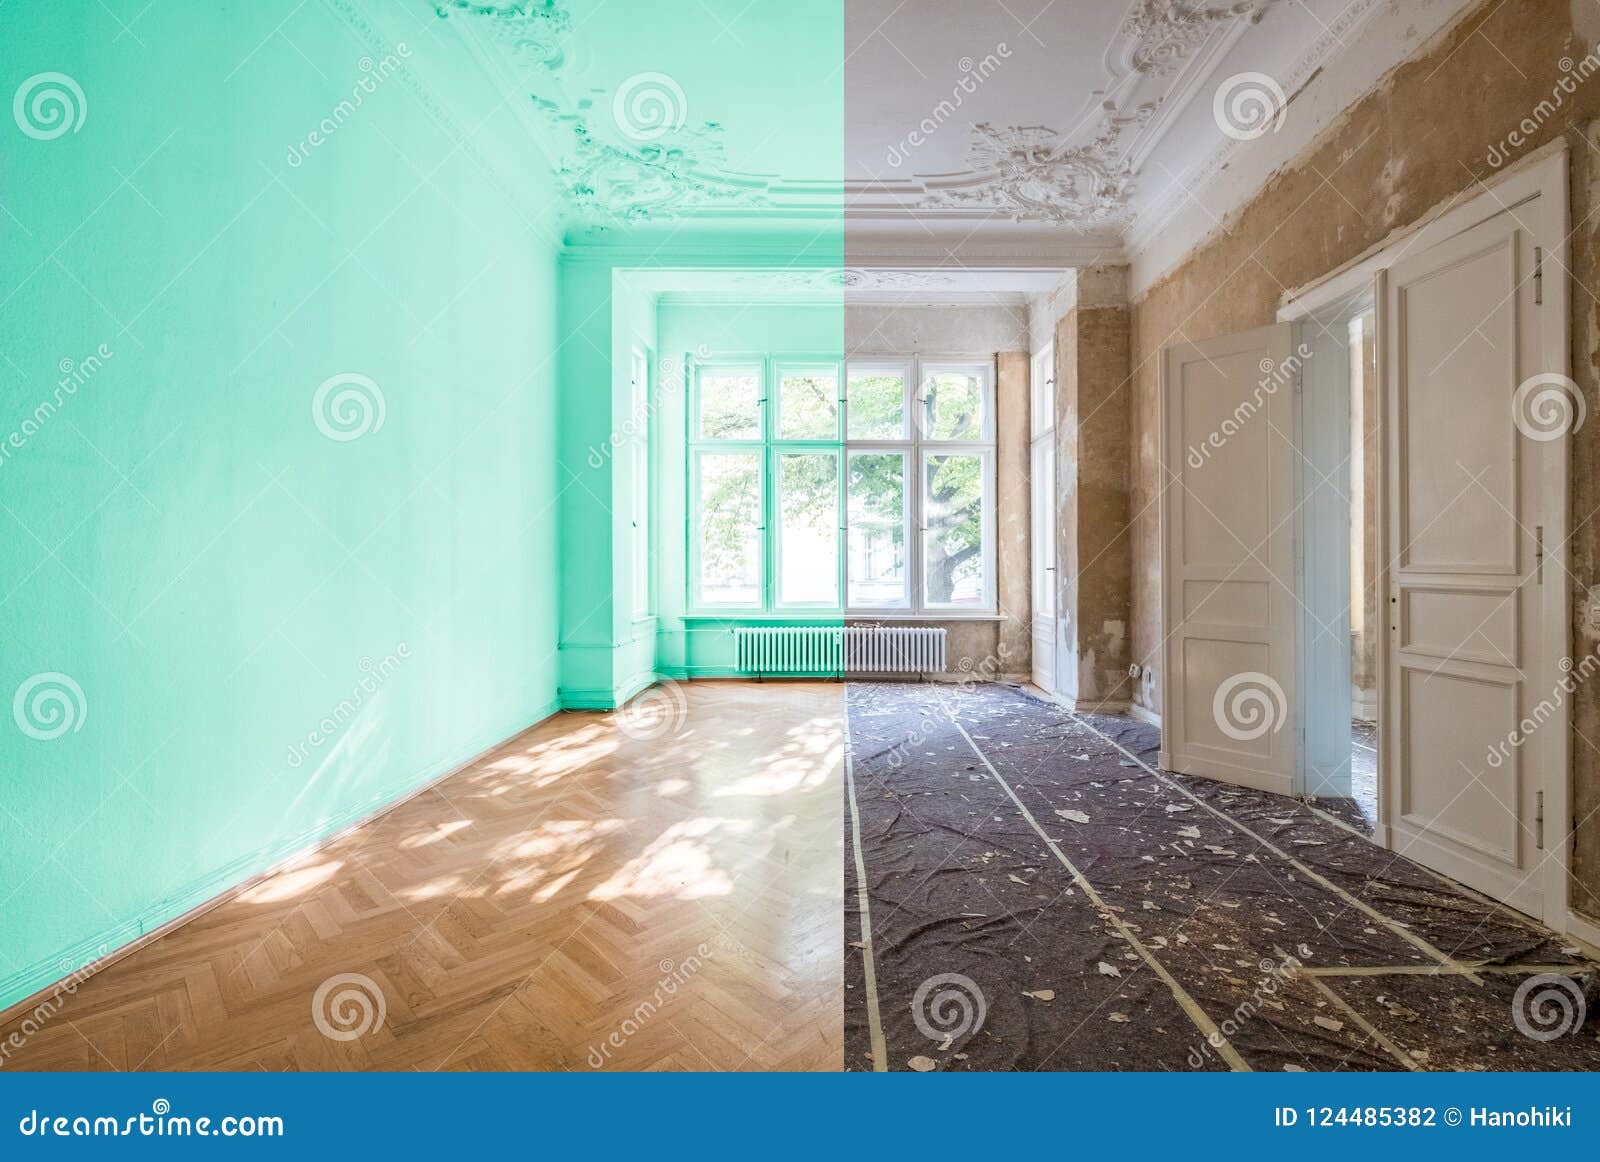 home renovation concept - apartment room before and after restoration or refurbishment